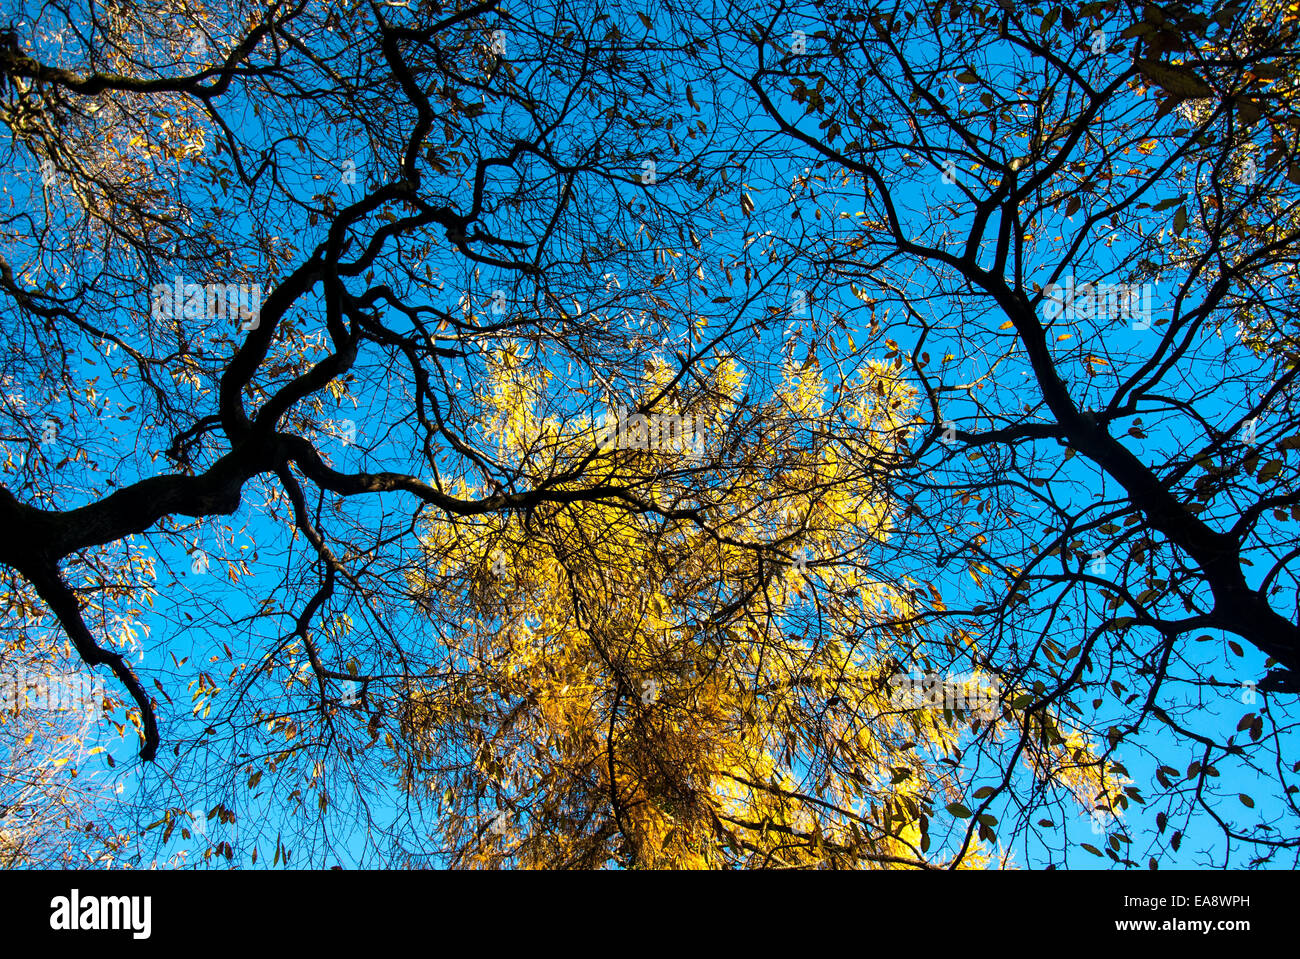 Bright yellow Larch tree in autumn contrasting against deep blue sky. Sweet Chestnut branches silhouetted against sky. Stock Photo